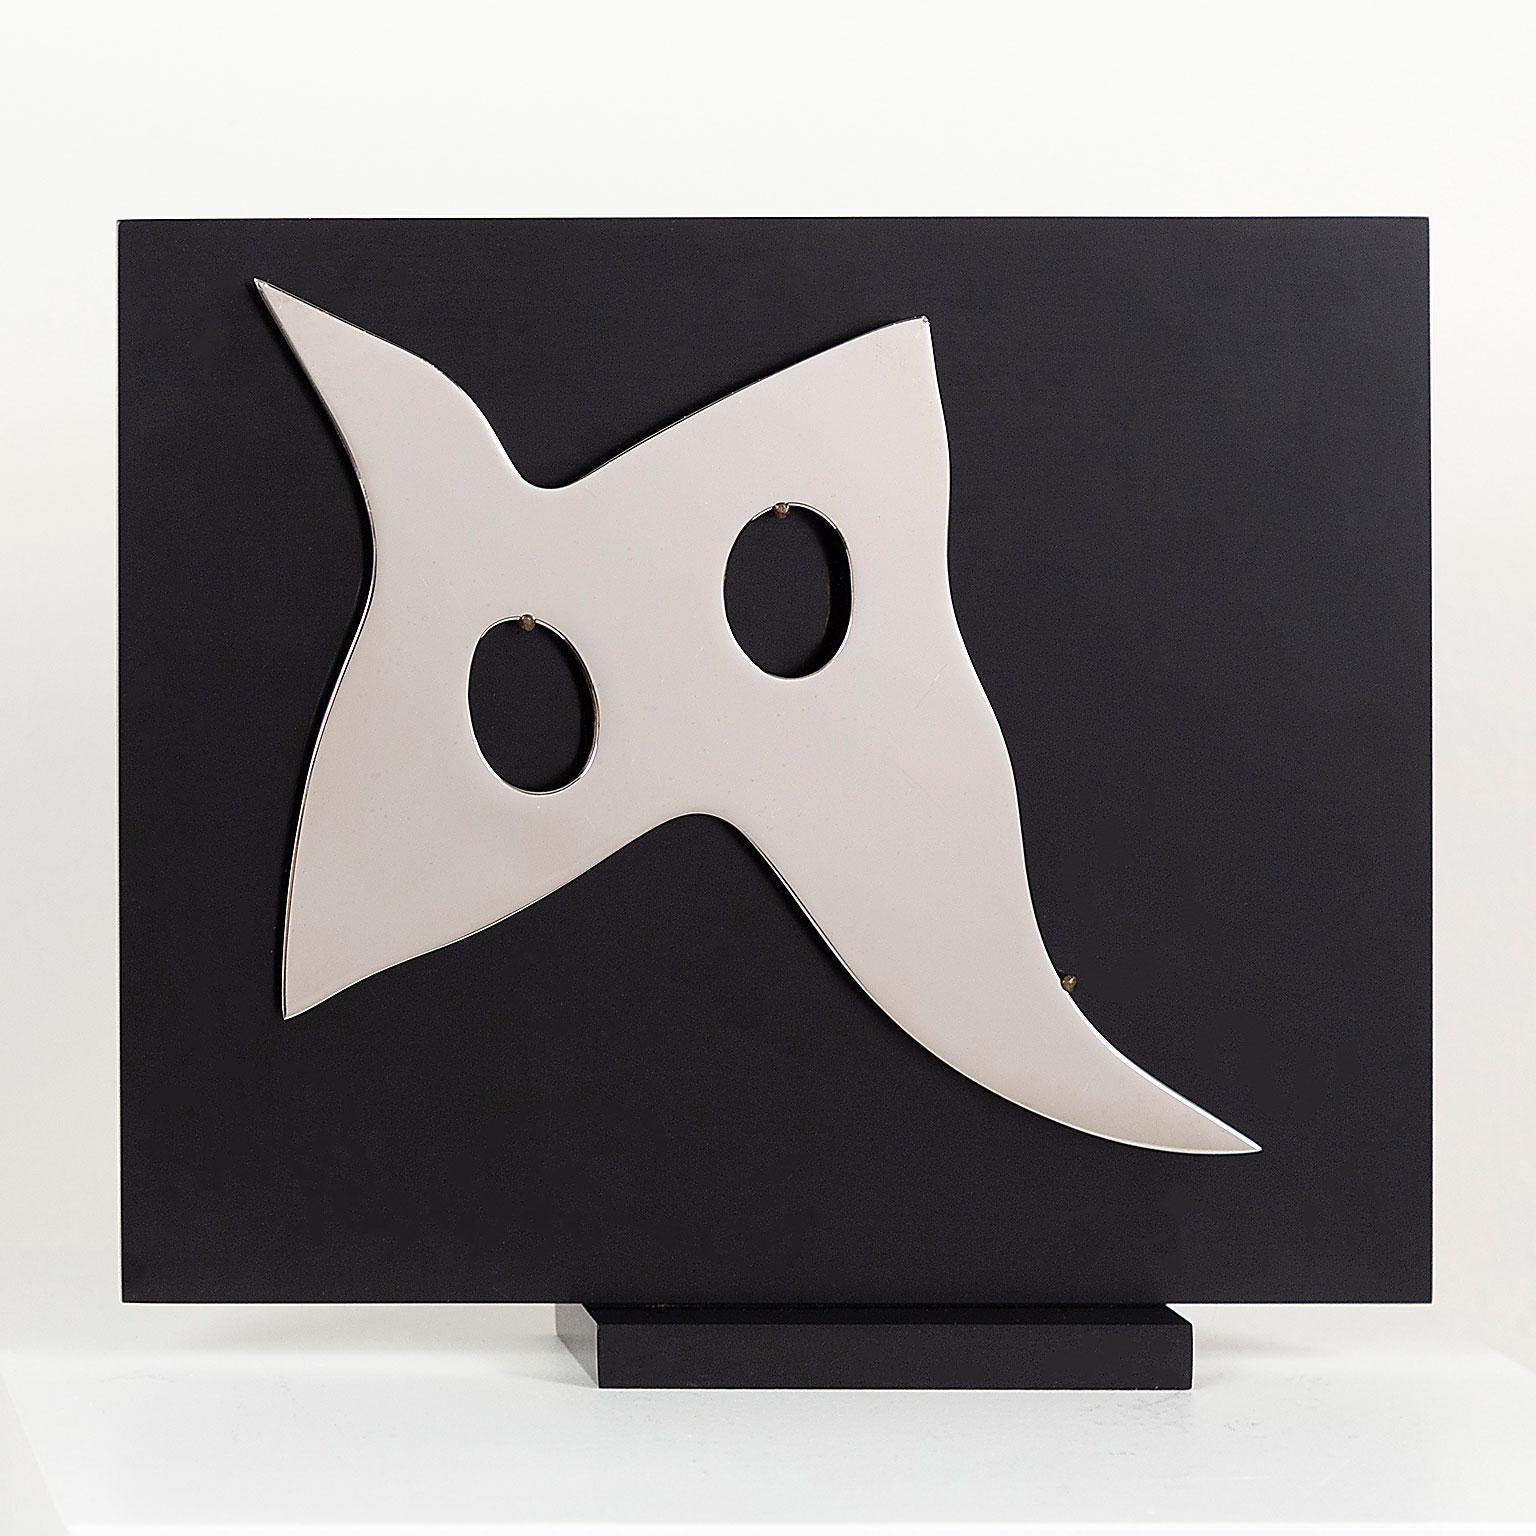 What type of art did Jean Arp do?